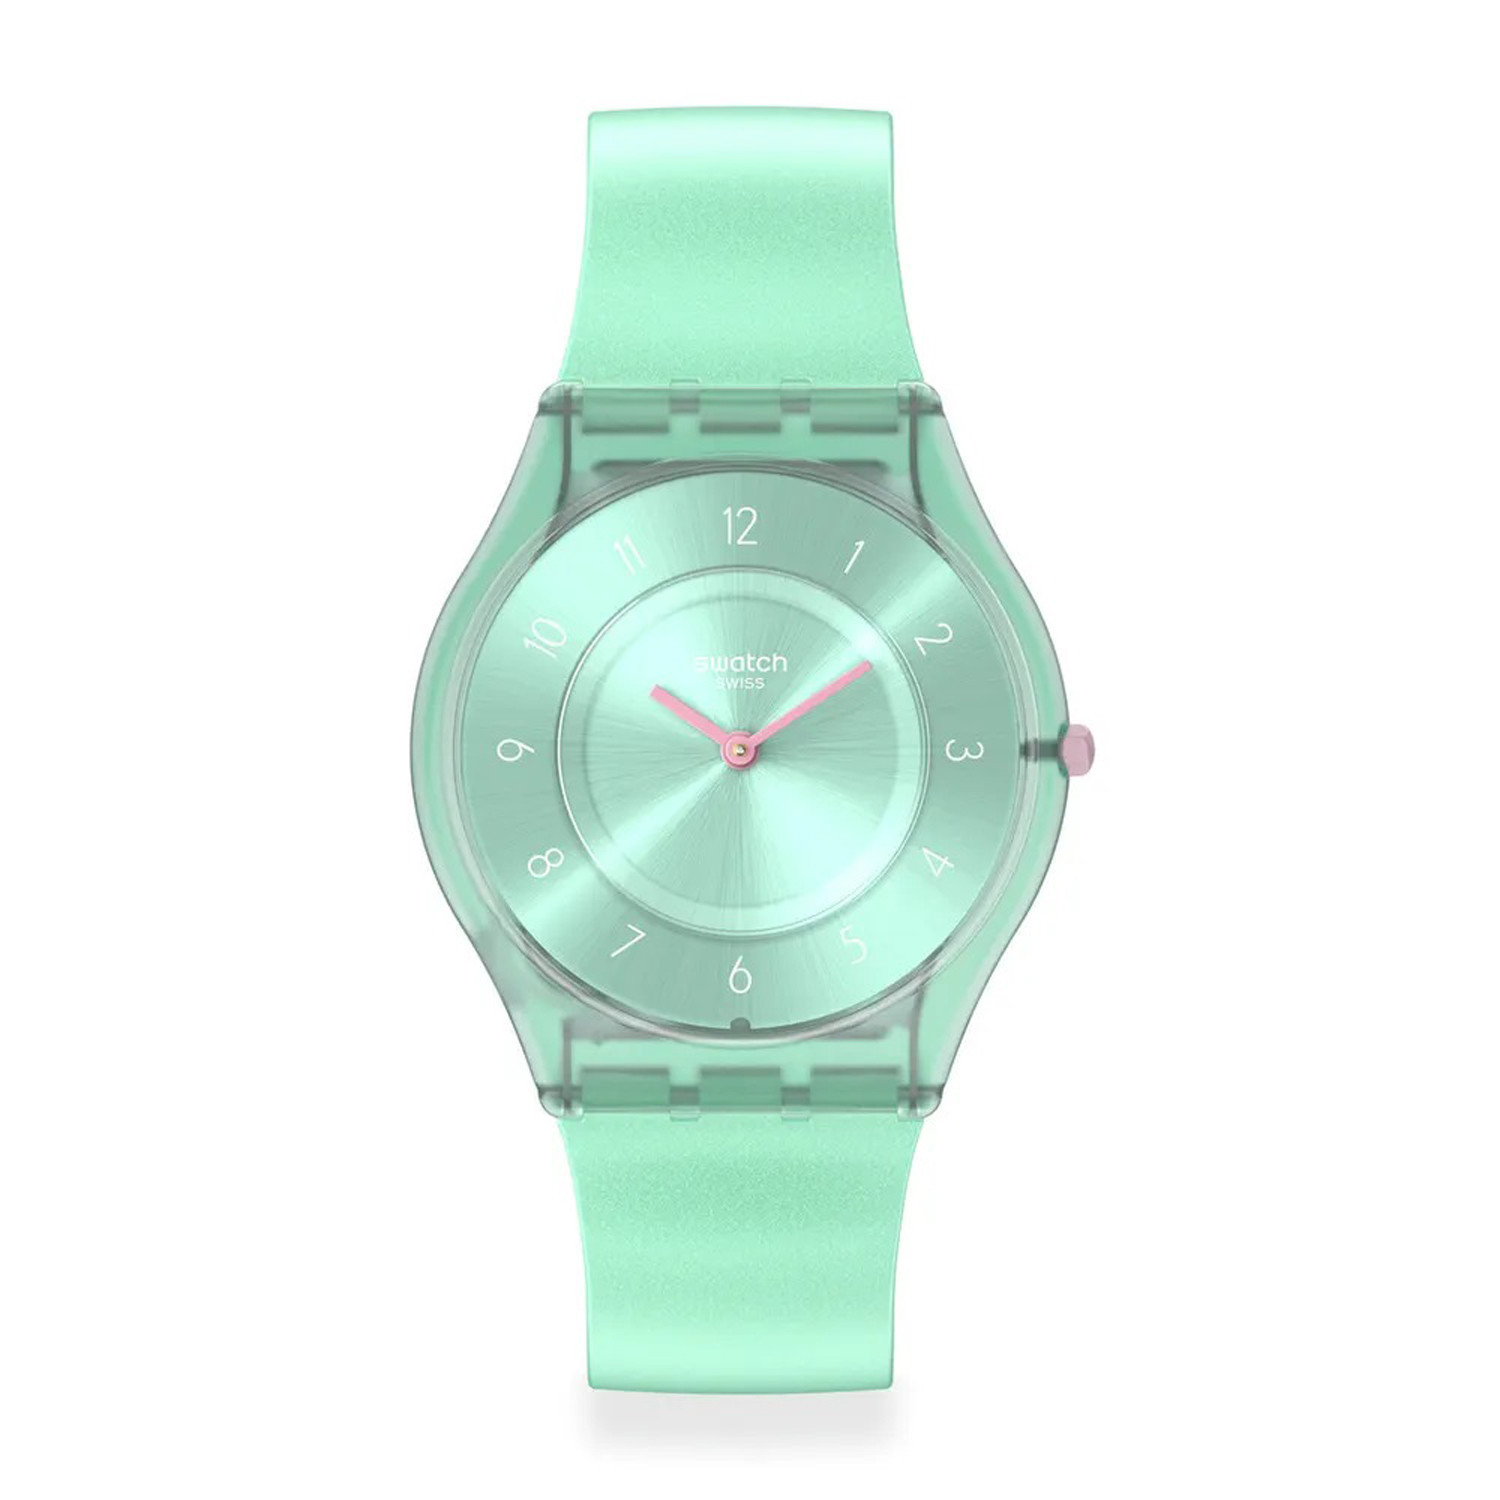 Montre femme Swatch Pastelicious Teal
silicone